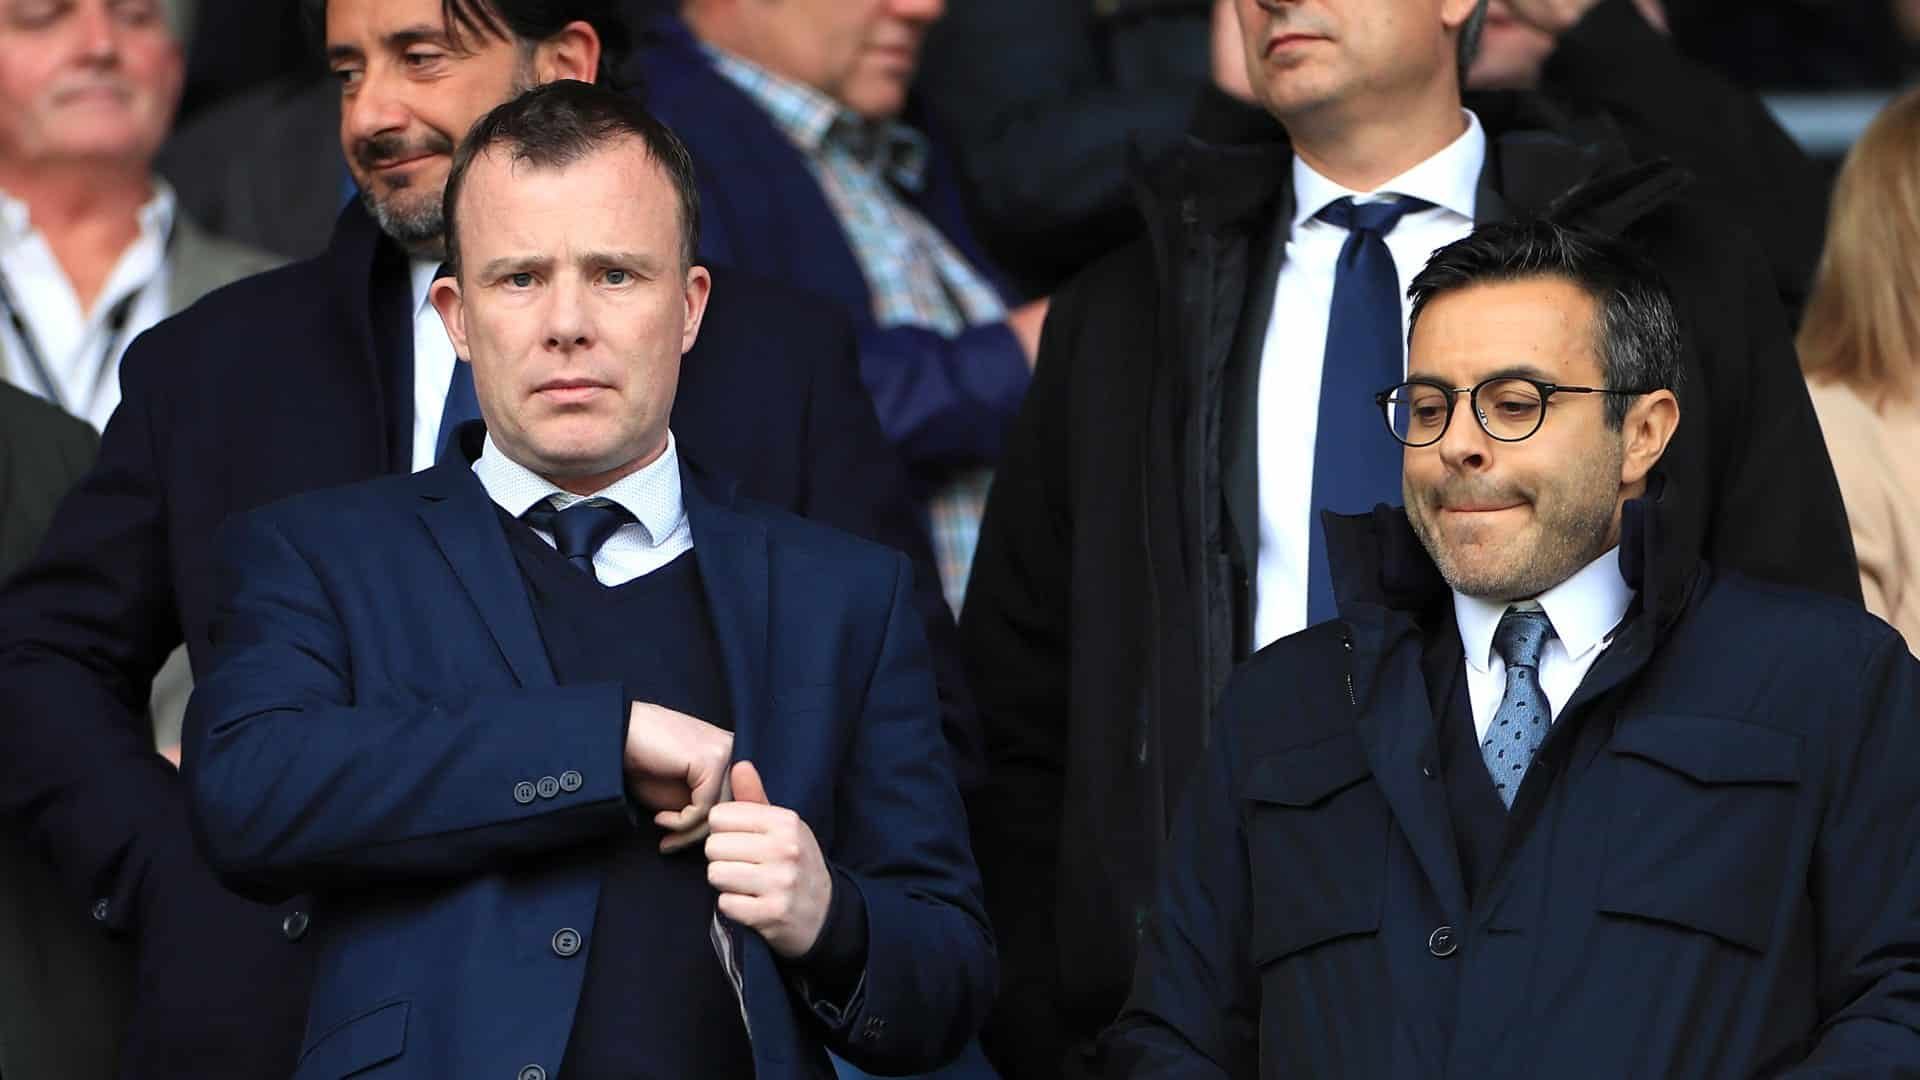 Angus Kinnear and Andrea Radrizzani looking worried back in May 2019. This was actually taken at the first leg of the play-off semi-finals, away to Derby, when we won, so I don't know why they looked so worried